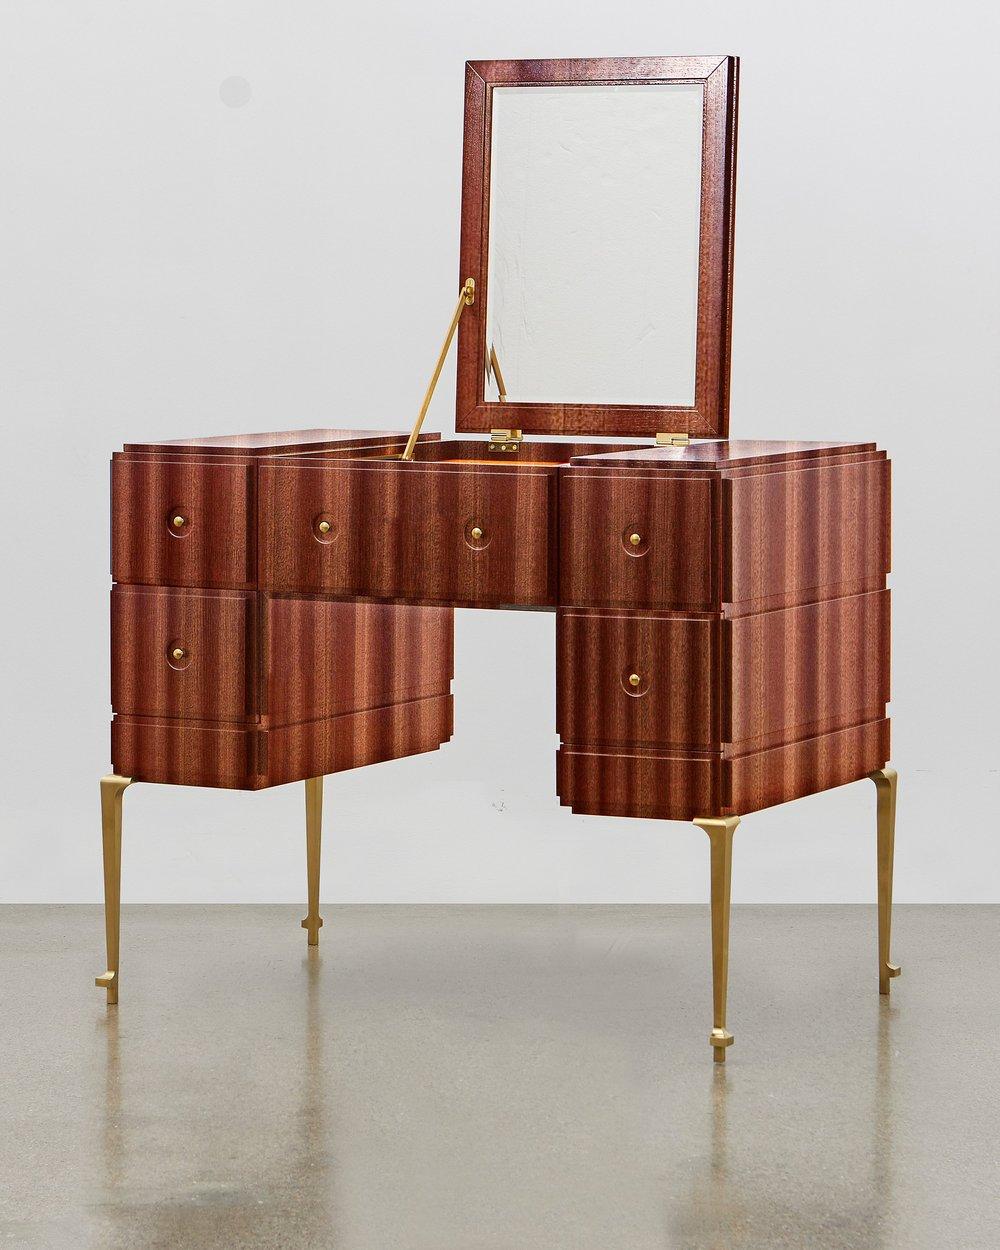 Designed in 1920 by Poul Henningsen (PH), the PH grand dressing table is the larger relative of the PH dressing table, sharing all of the beautiful design features of its narrower counterpart – with the added advantage of extra storage space.

The